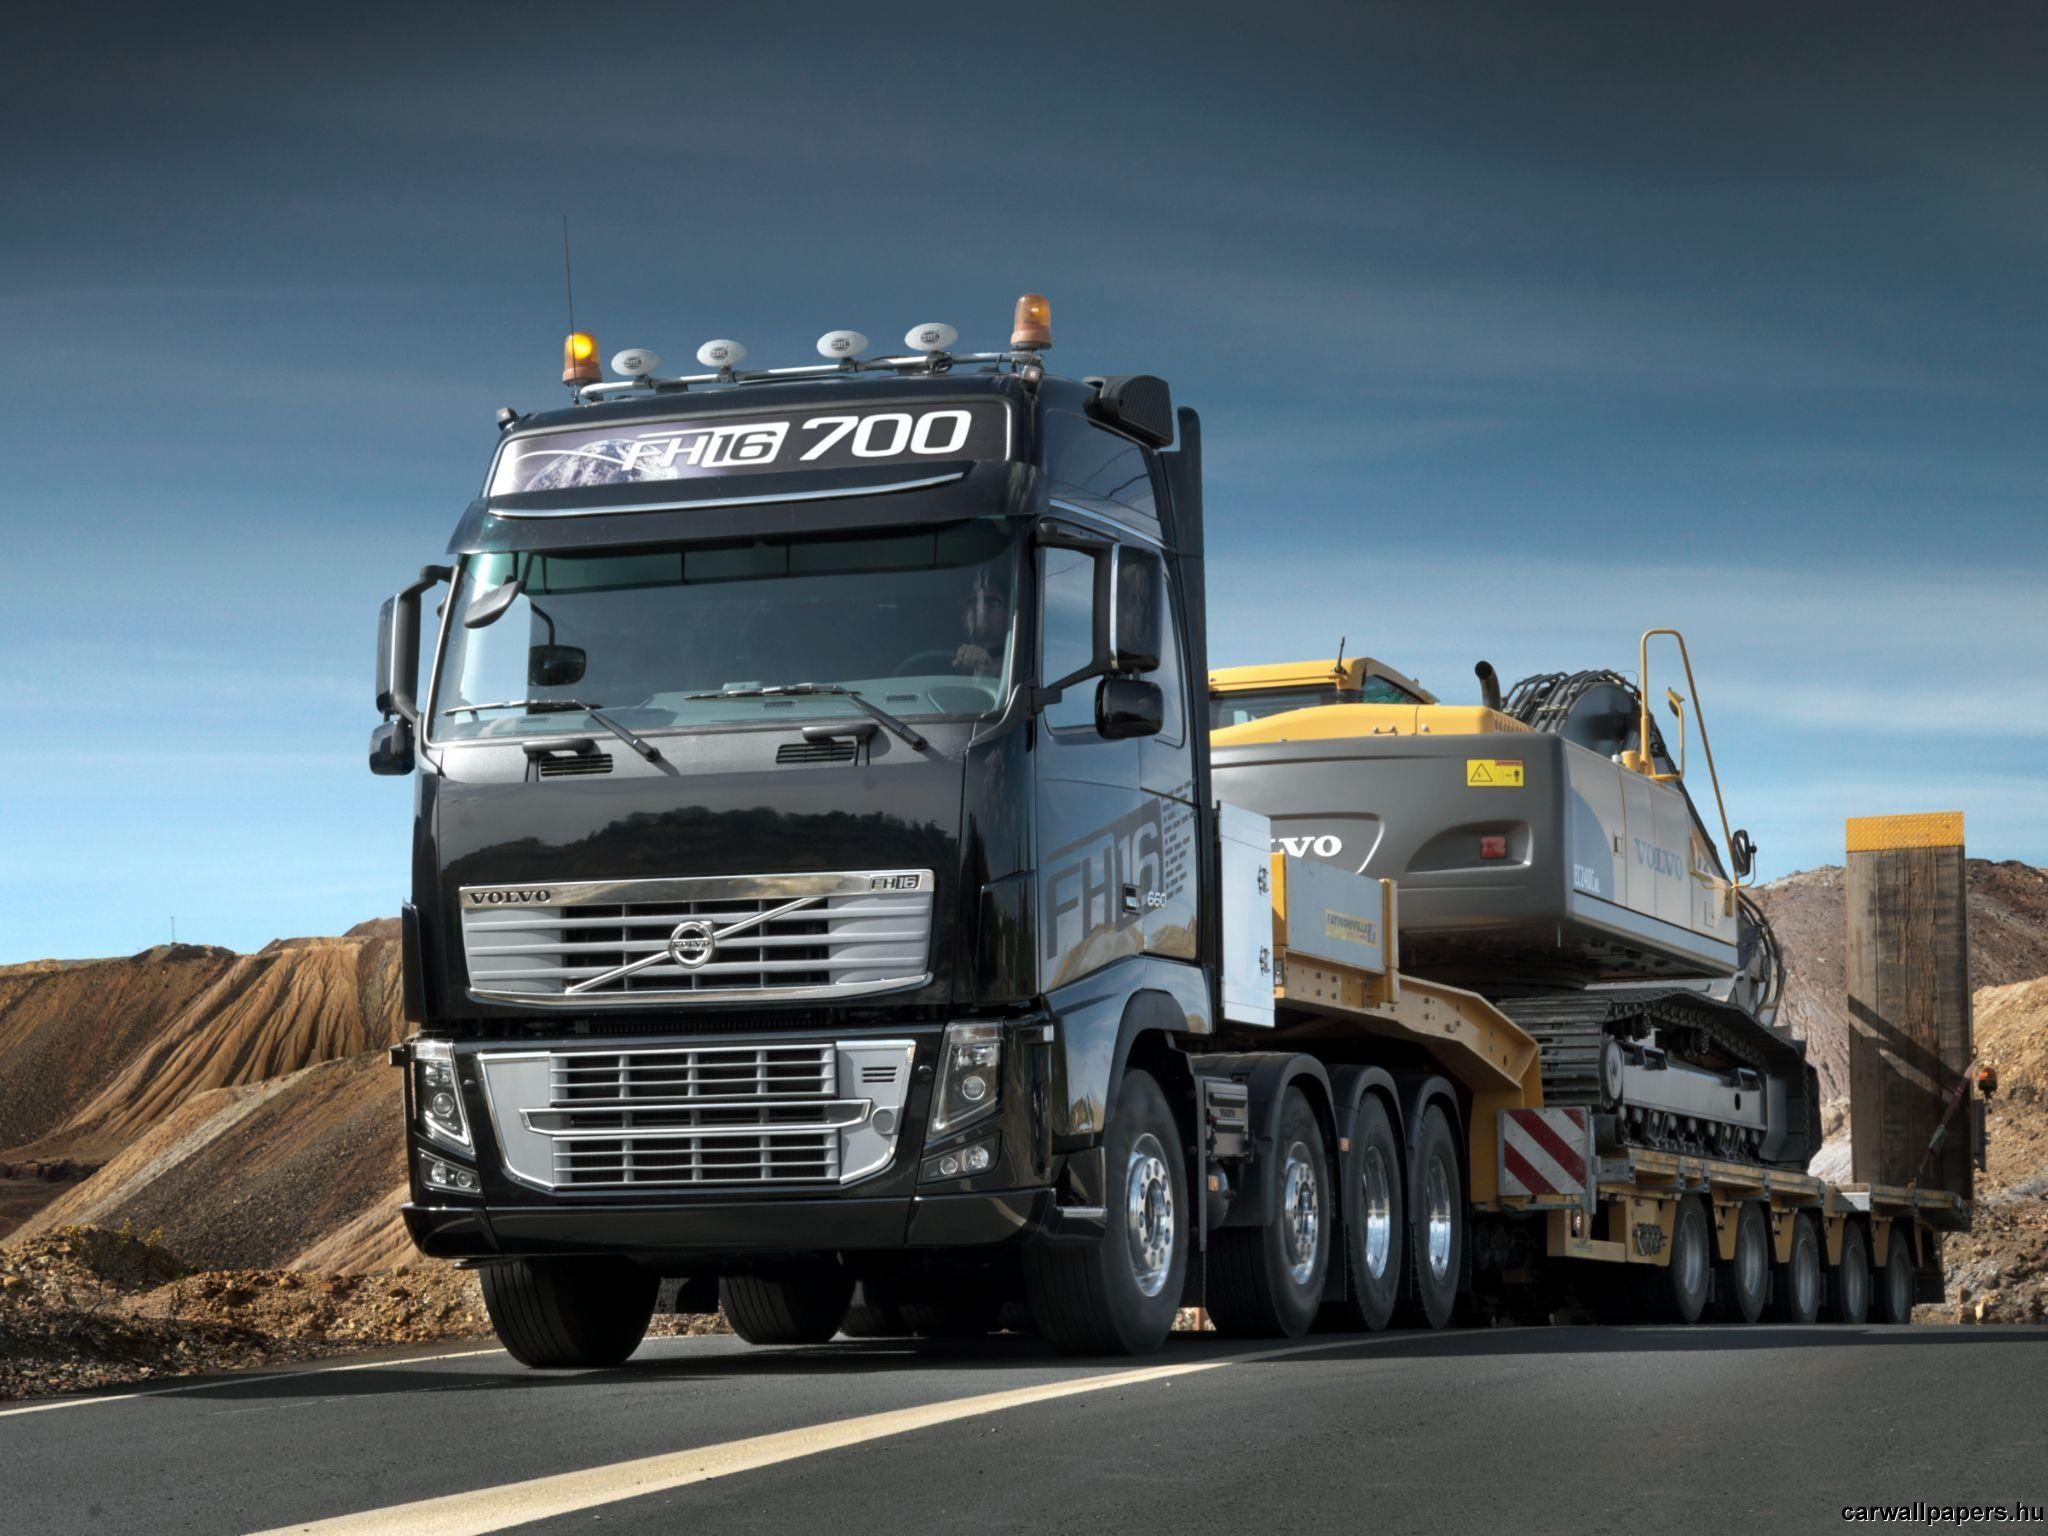 Ship Your Car Now on Heavy Haul Transport